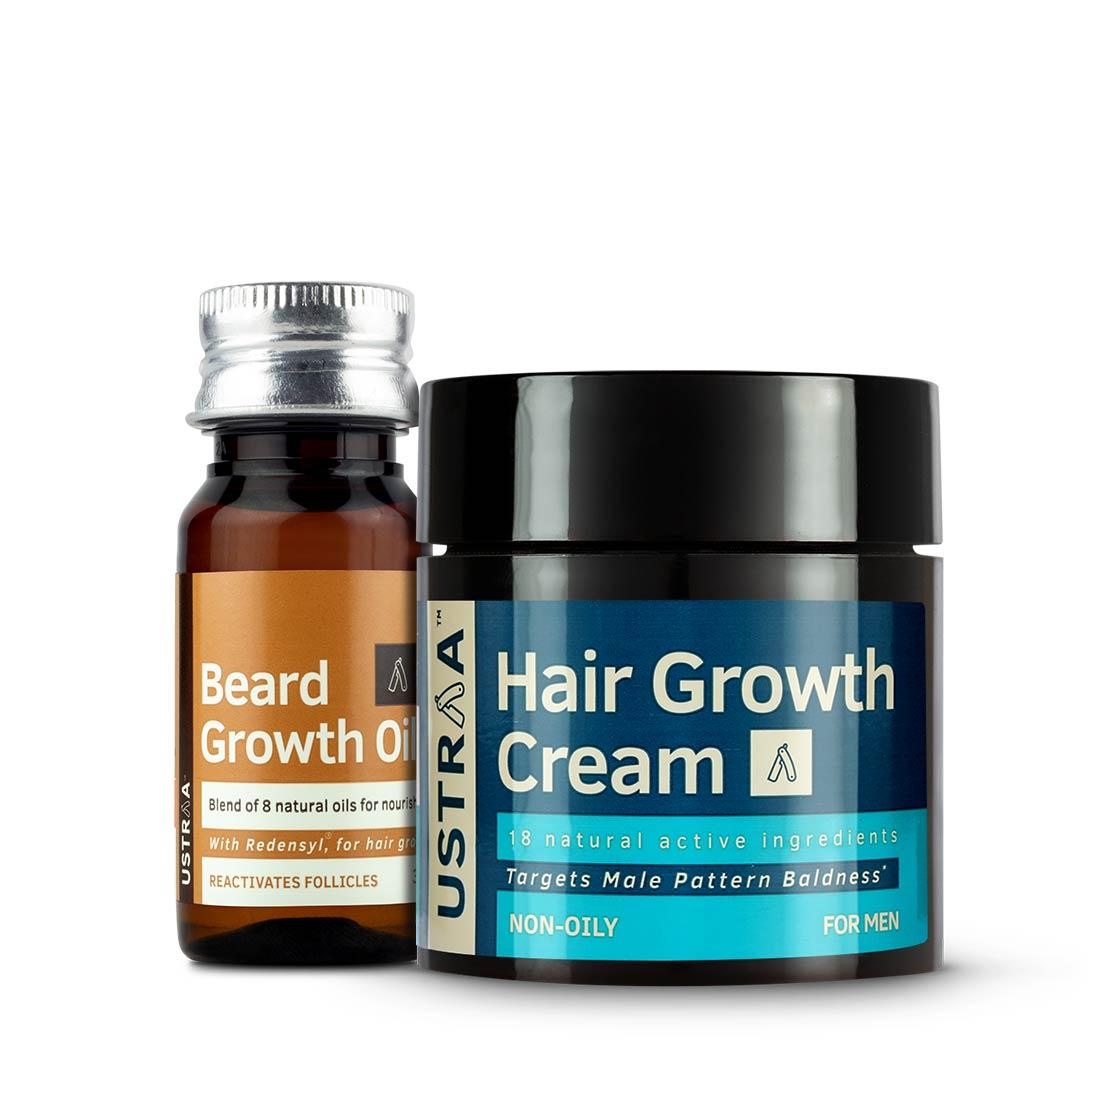 Ustraa Beard Growth Oil and Hair Growth Cream Combo for Men: With Redensyl, Saw Palmetto, Natural Oils & Onion Extract